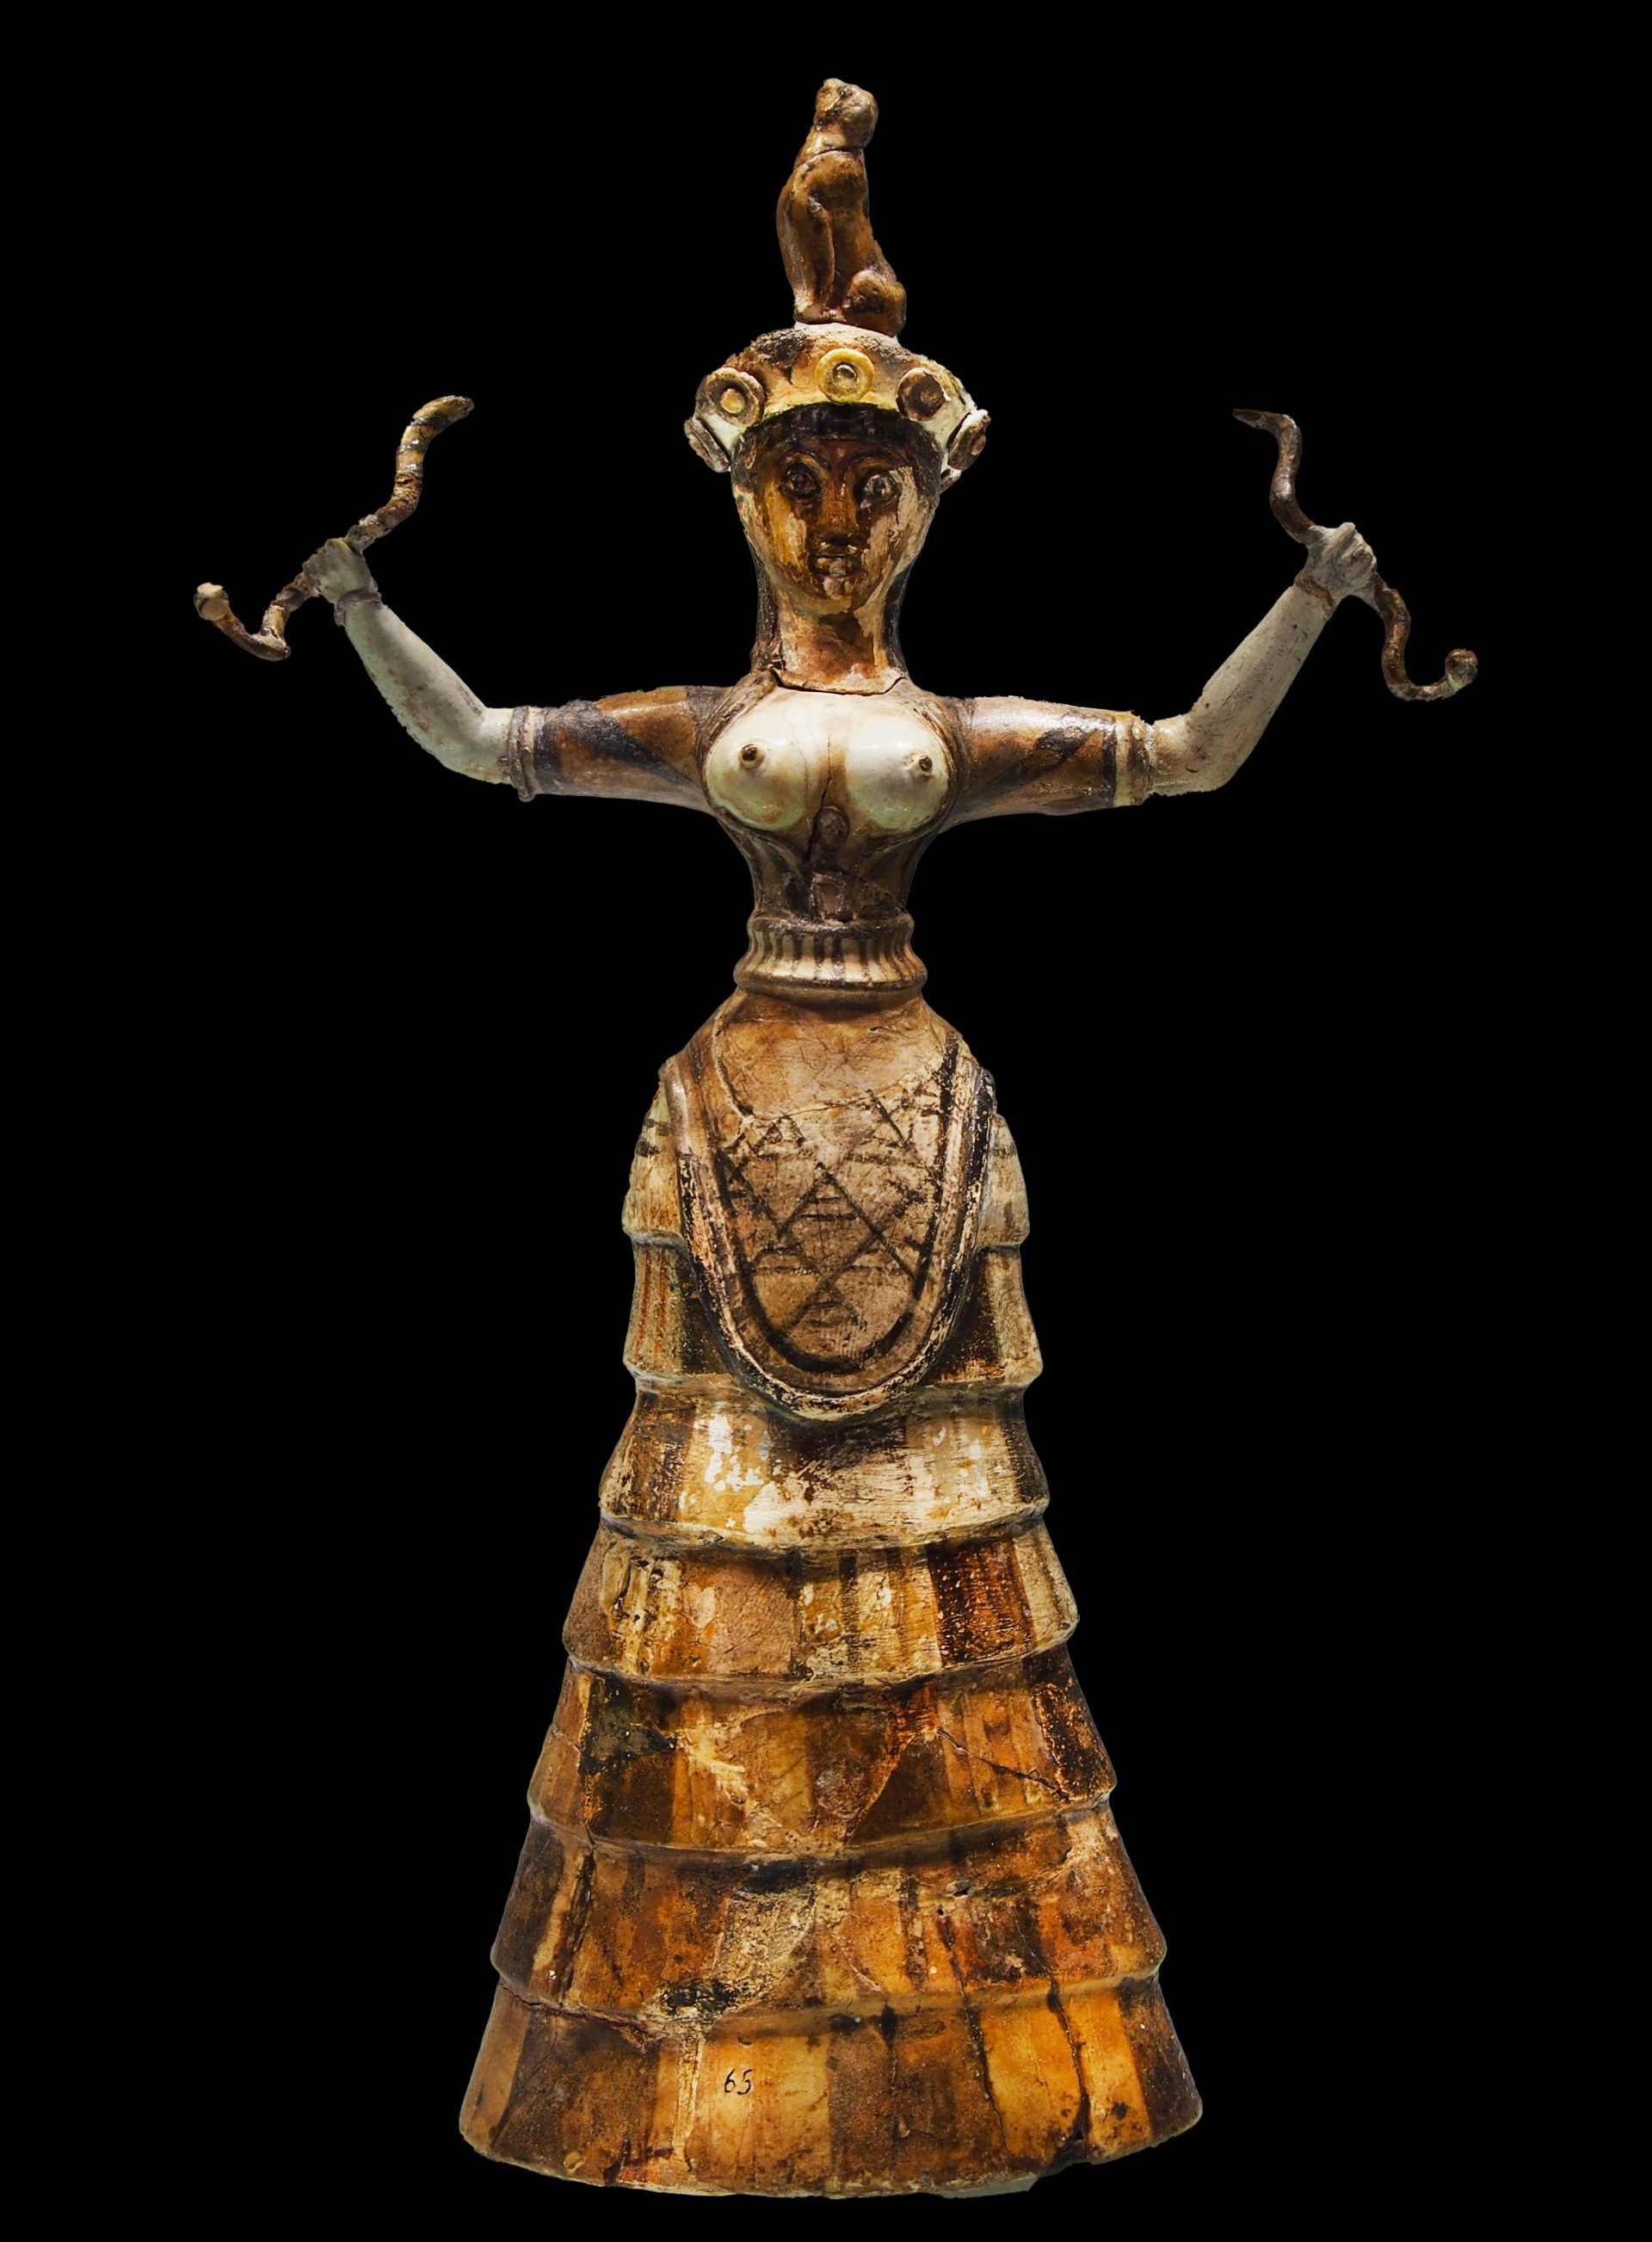 Image of the Minoan Snake Goddess. The deity is bare-breasted with a pronounced headdress and a flowing skirt. She confidently holds a snake in each hand, symbolizing fertility, regeneration, and wisdom, consistent with Near and Middle East Bronze Age beliefs.